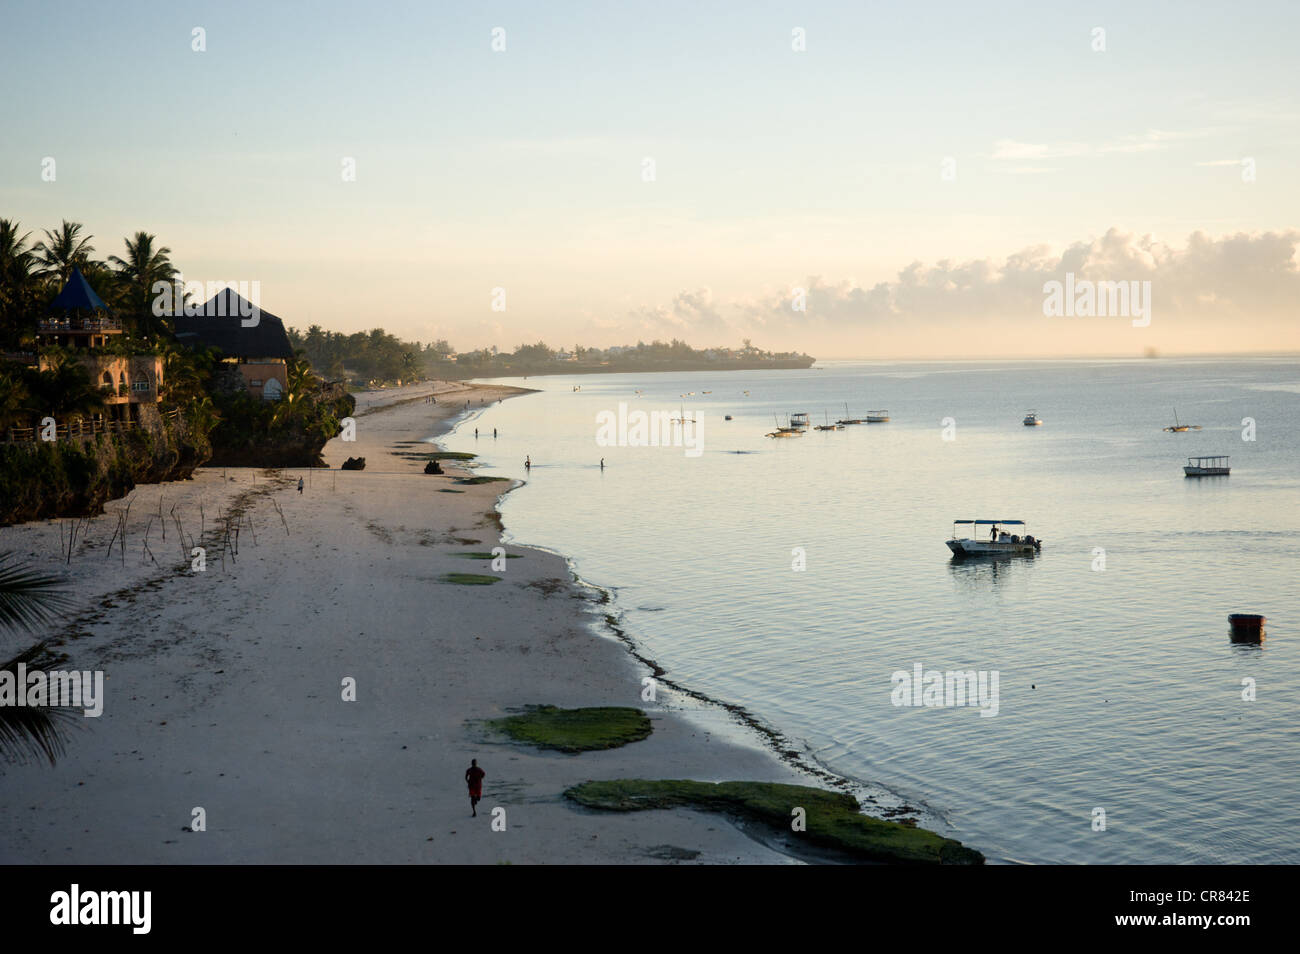 View on shoreline in the evening, when sun is going down. Mombasa, Kenya, East Africa. Stock Photo